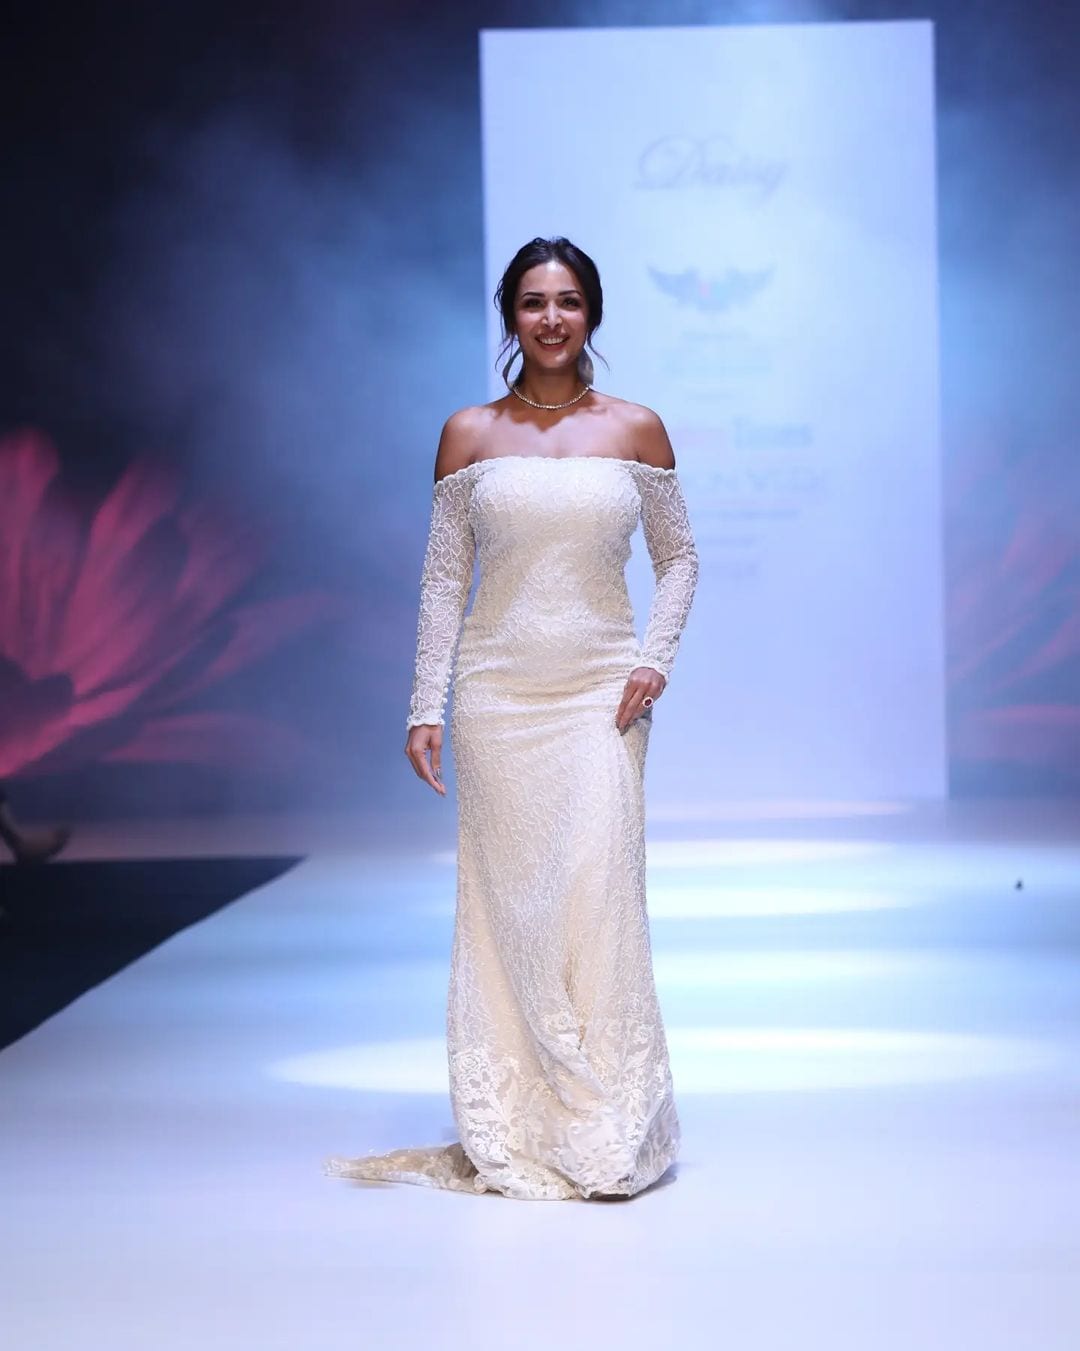 Malaika Arora looks exquisite as she walks the ramp in a white gown